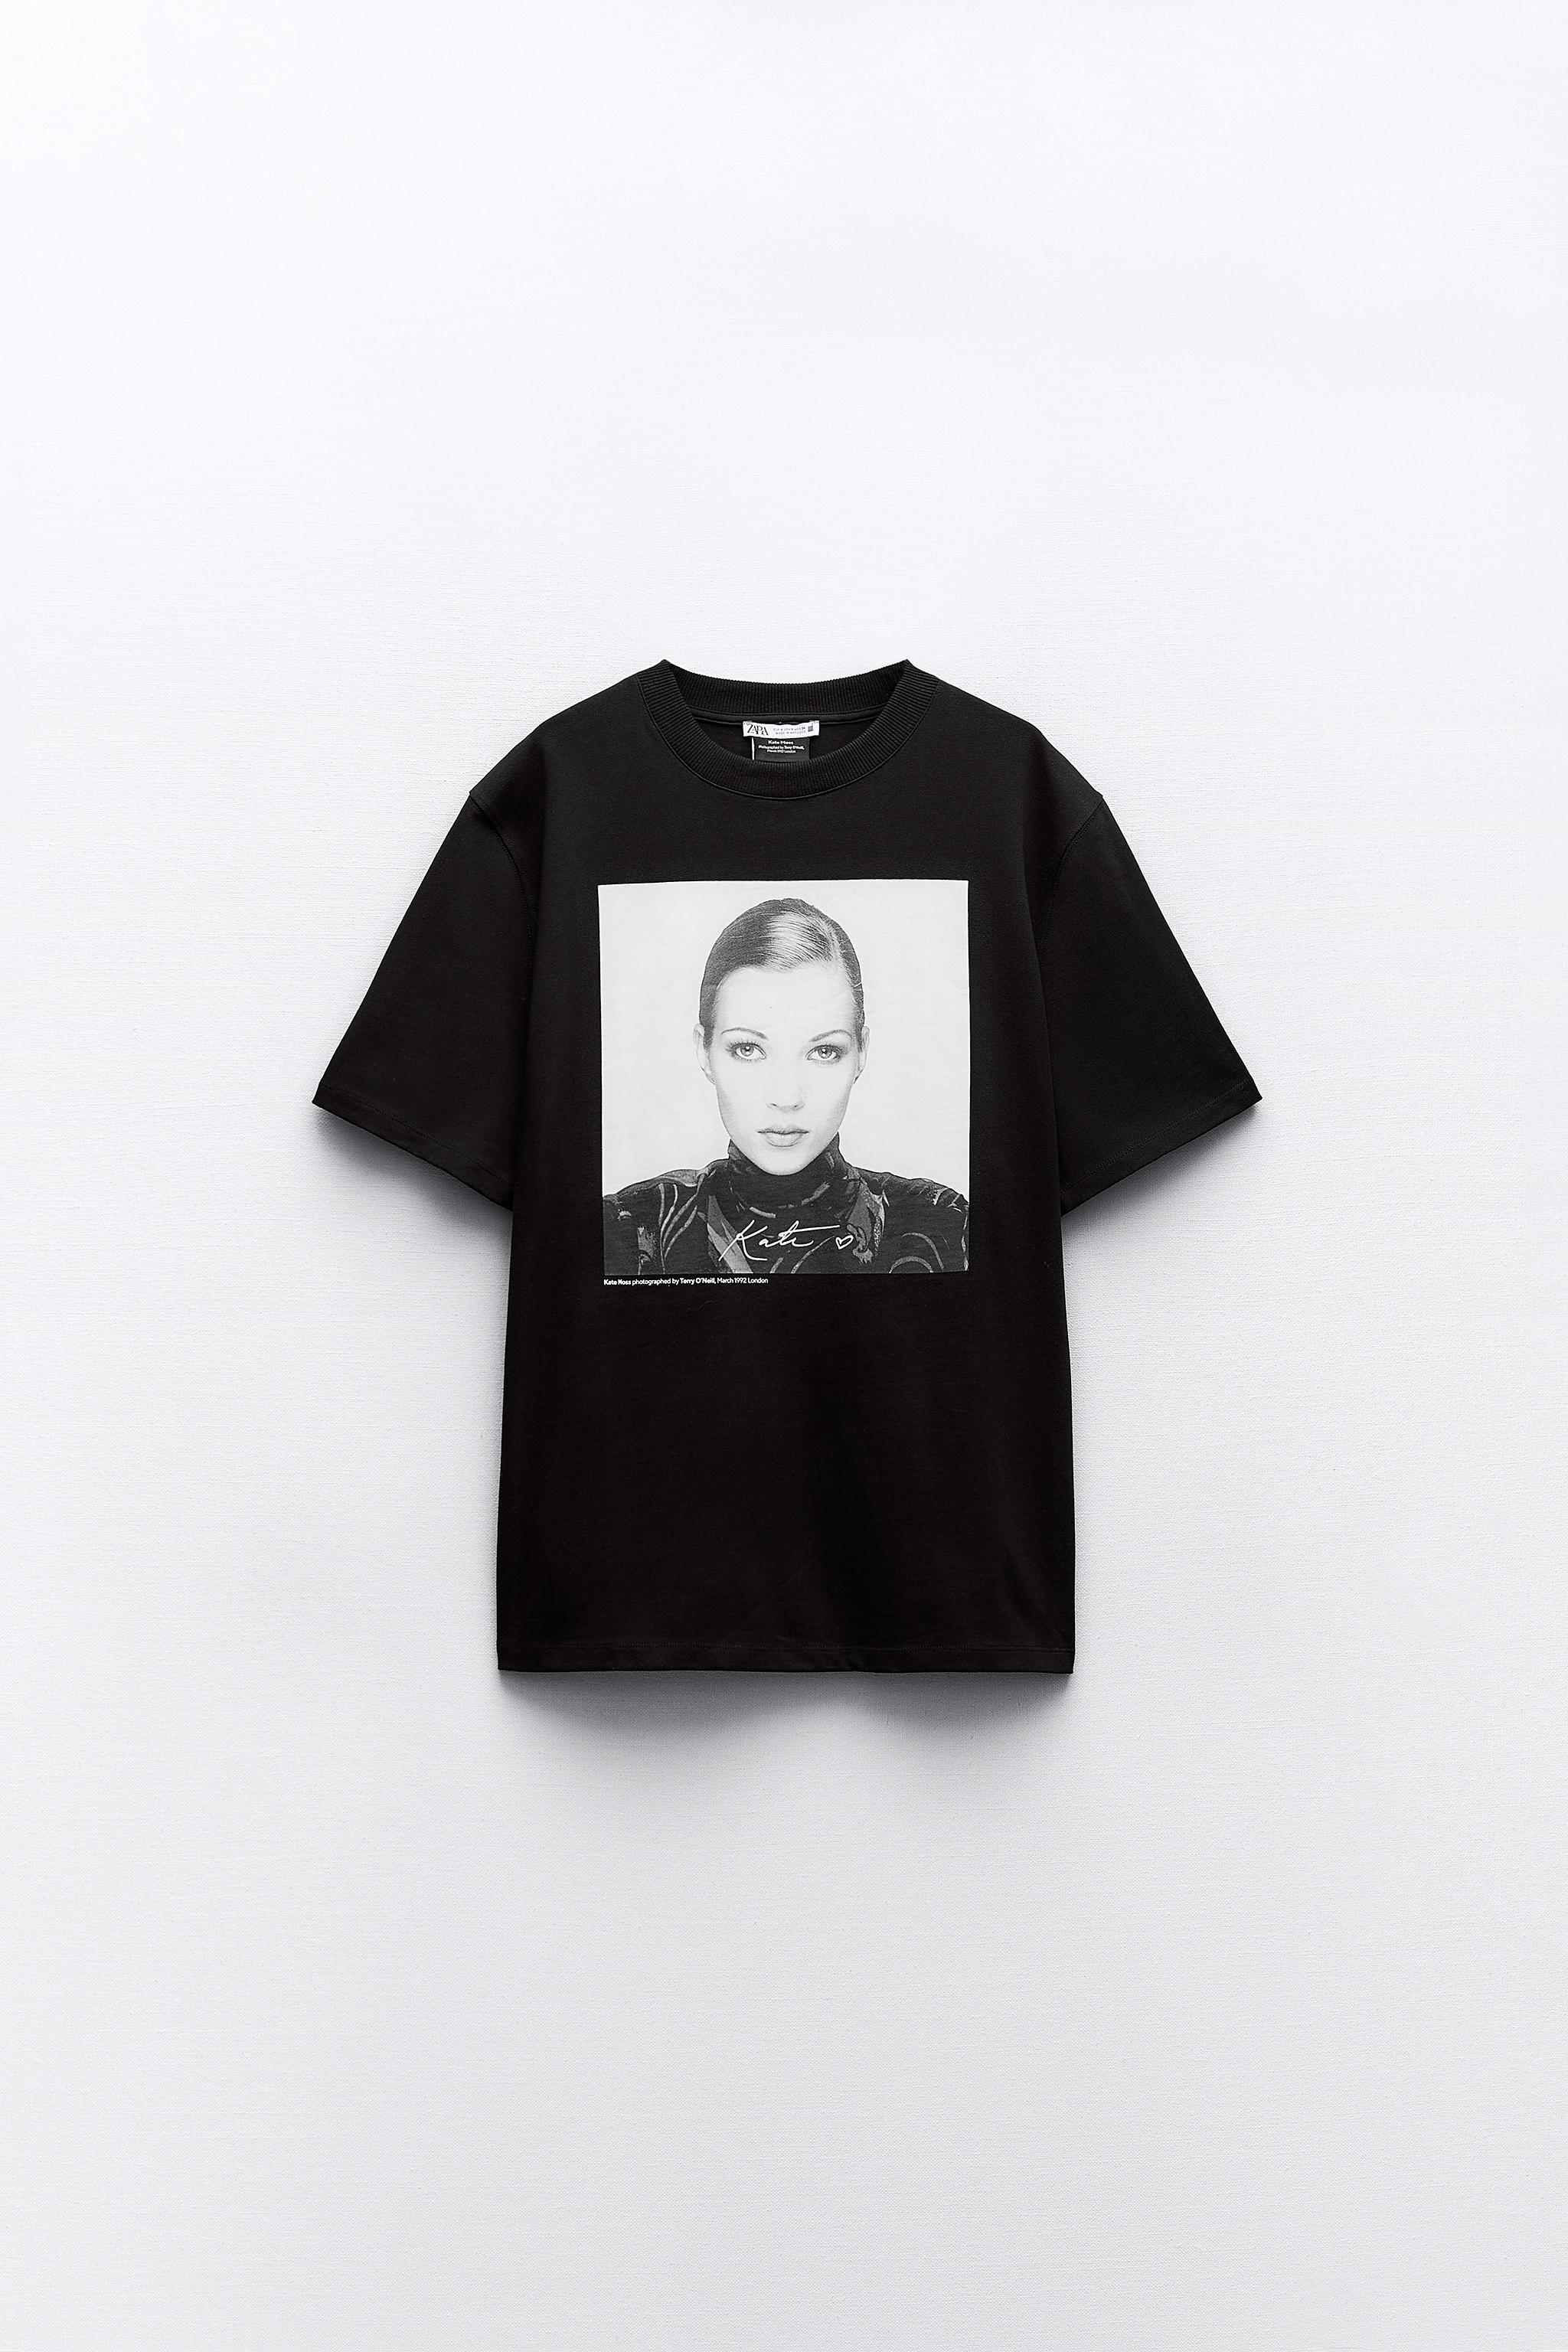 KATE MOSS © ICONIC IMAGES / TERRY O'NEILL 2024 T-SHIRT - Black